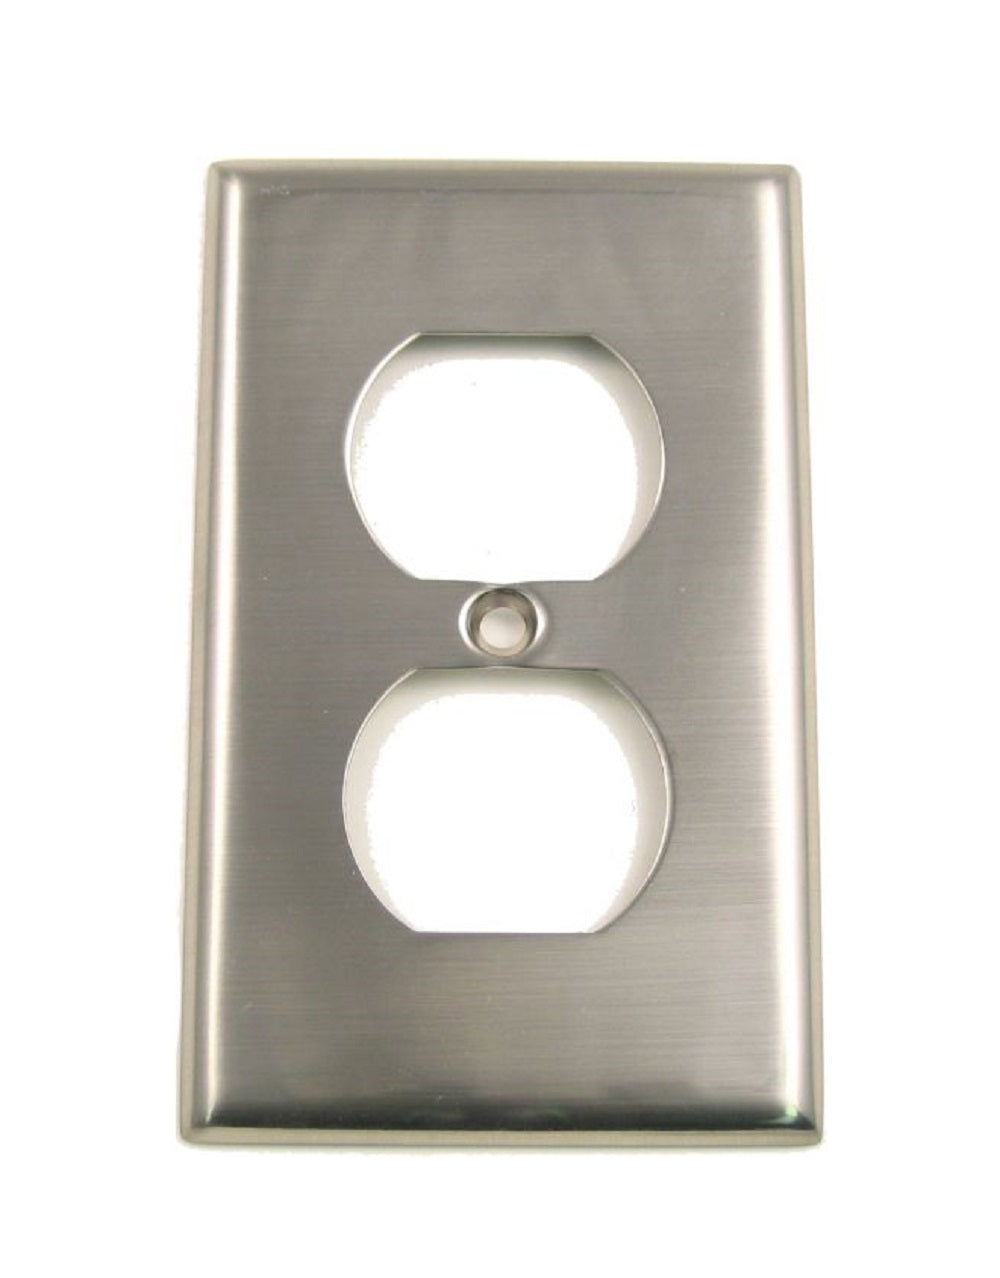 Rusticware 783SN Single Outlet Switch Plate, Satin Nickel